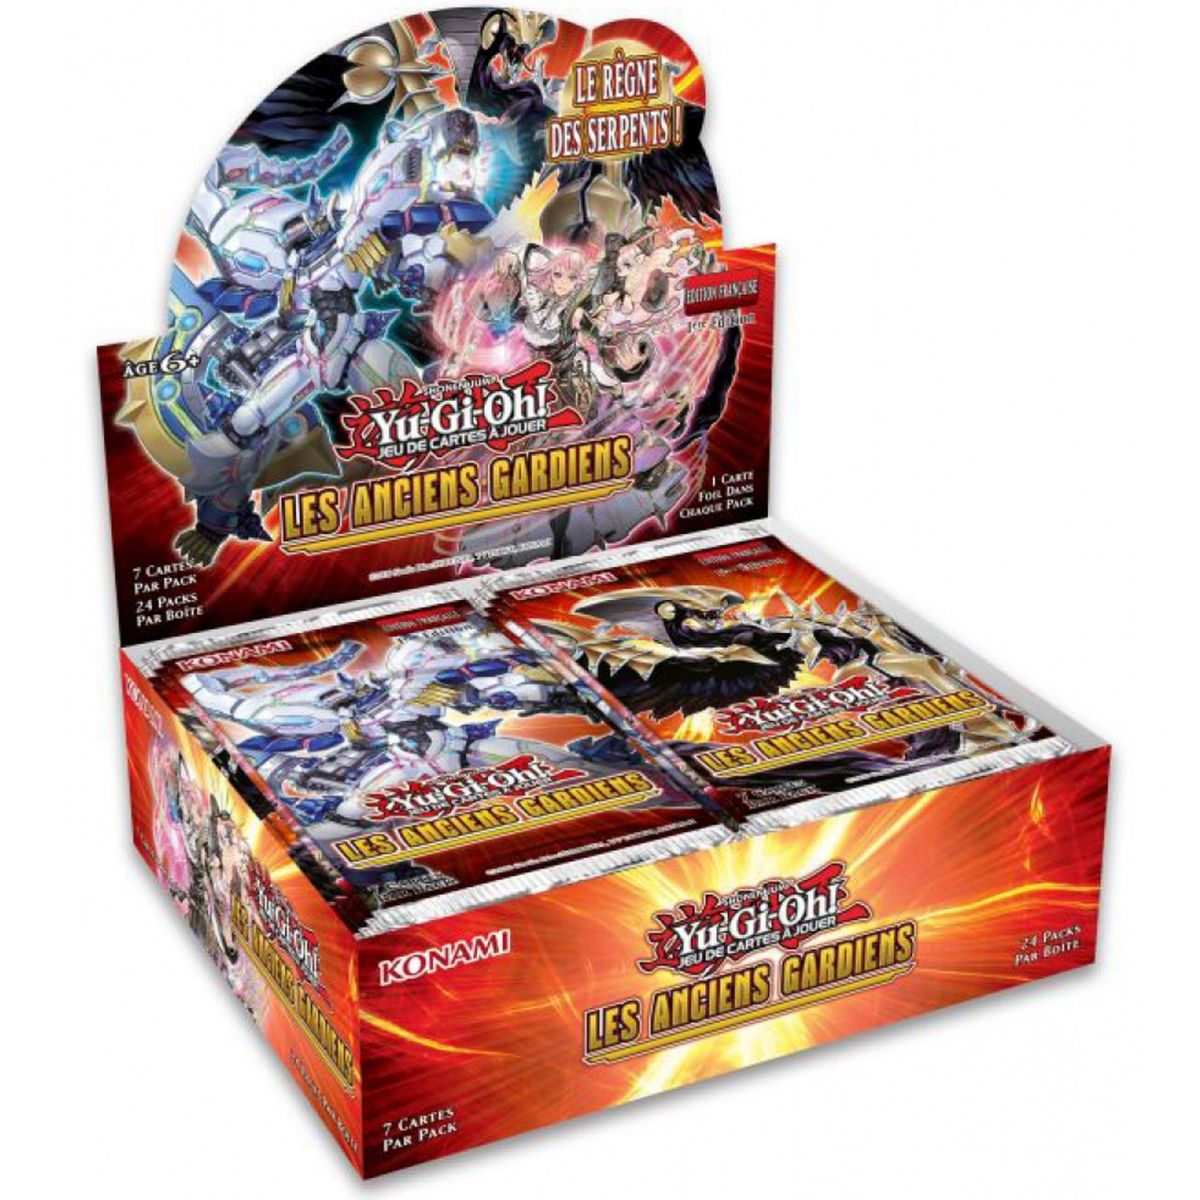 Item Yu Gi Oh! - Display - Box of 24 Boosters - The Ancient Guardians - FR